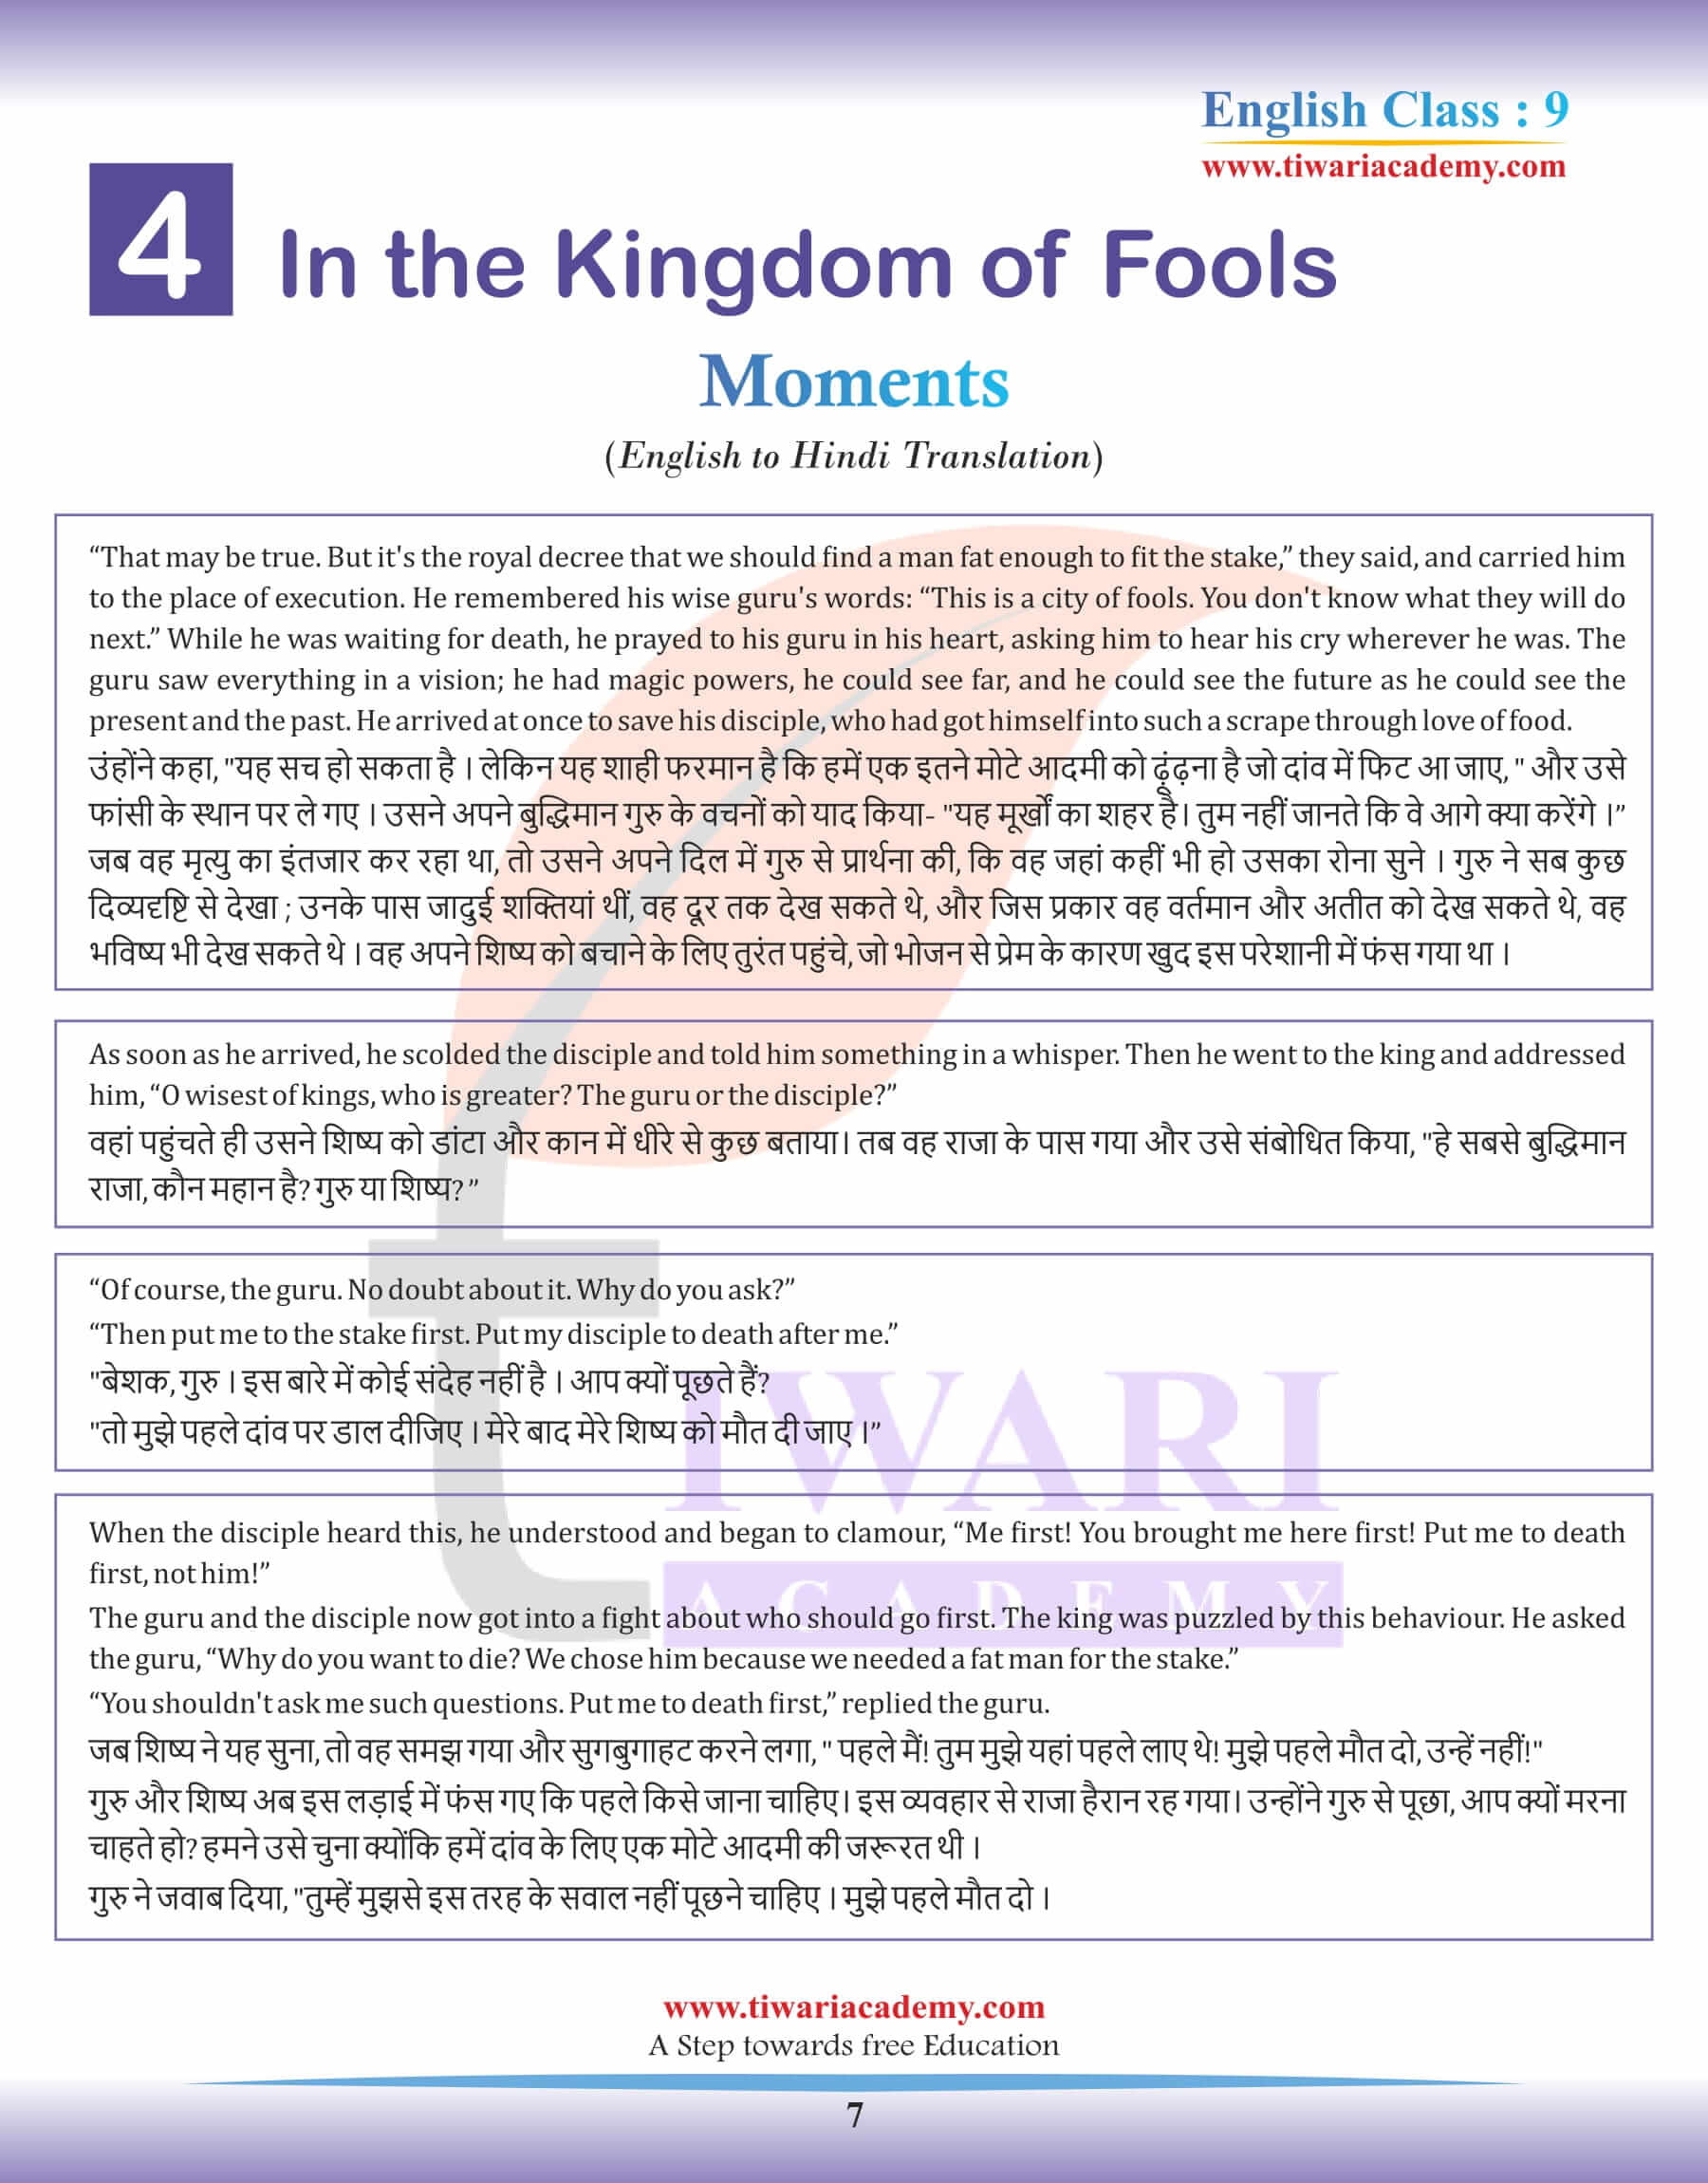 Class 9 English Moments Chapter 4 pdf download